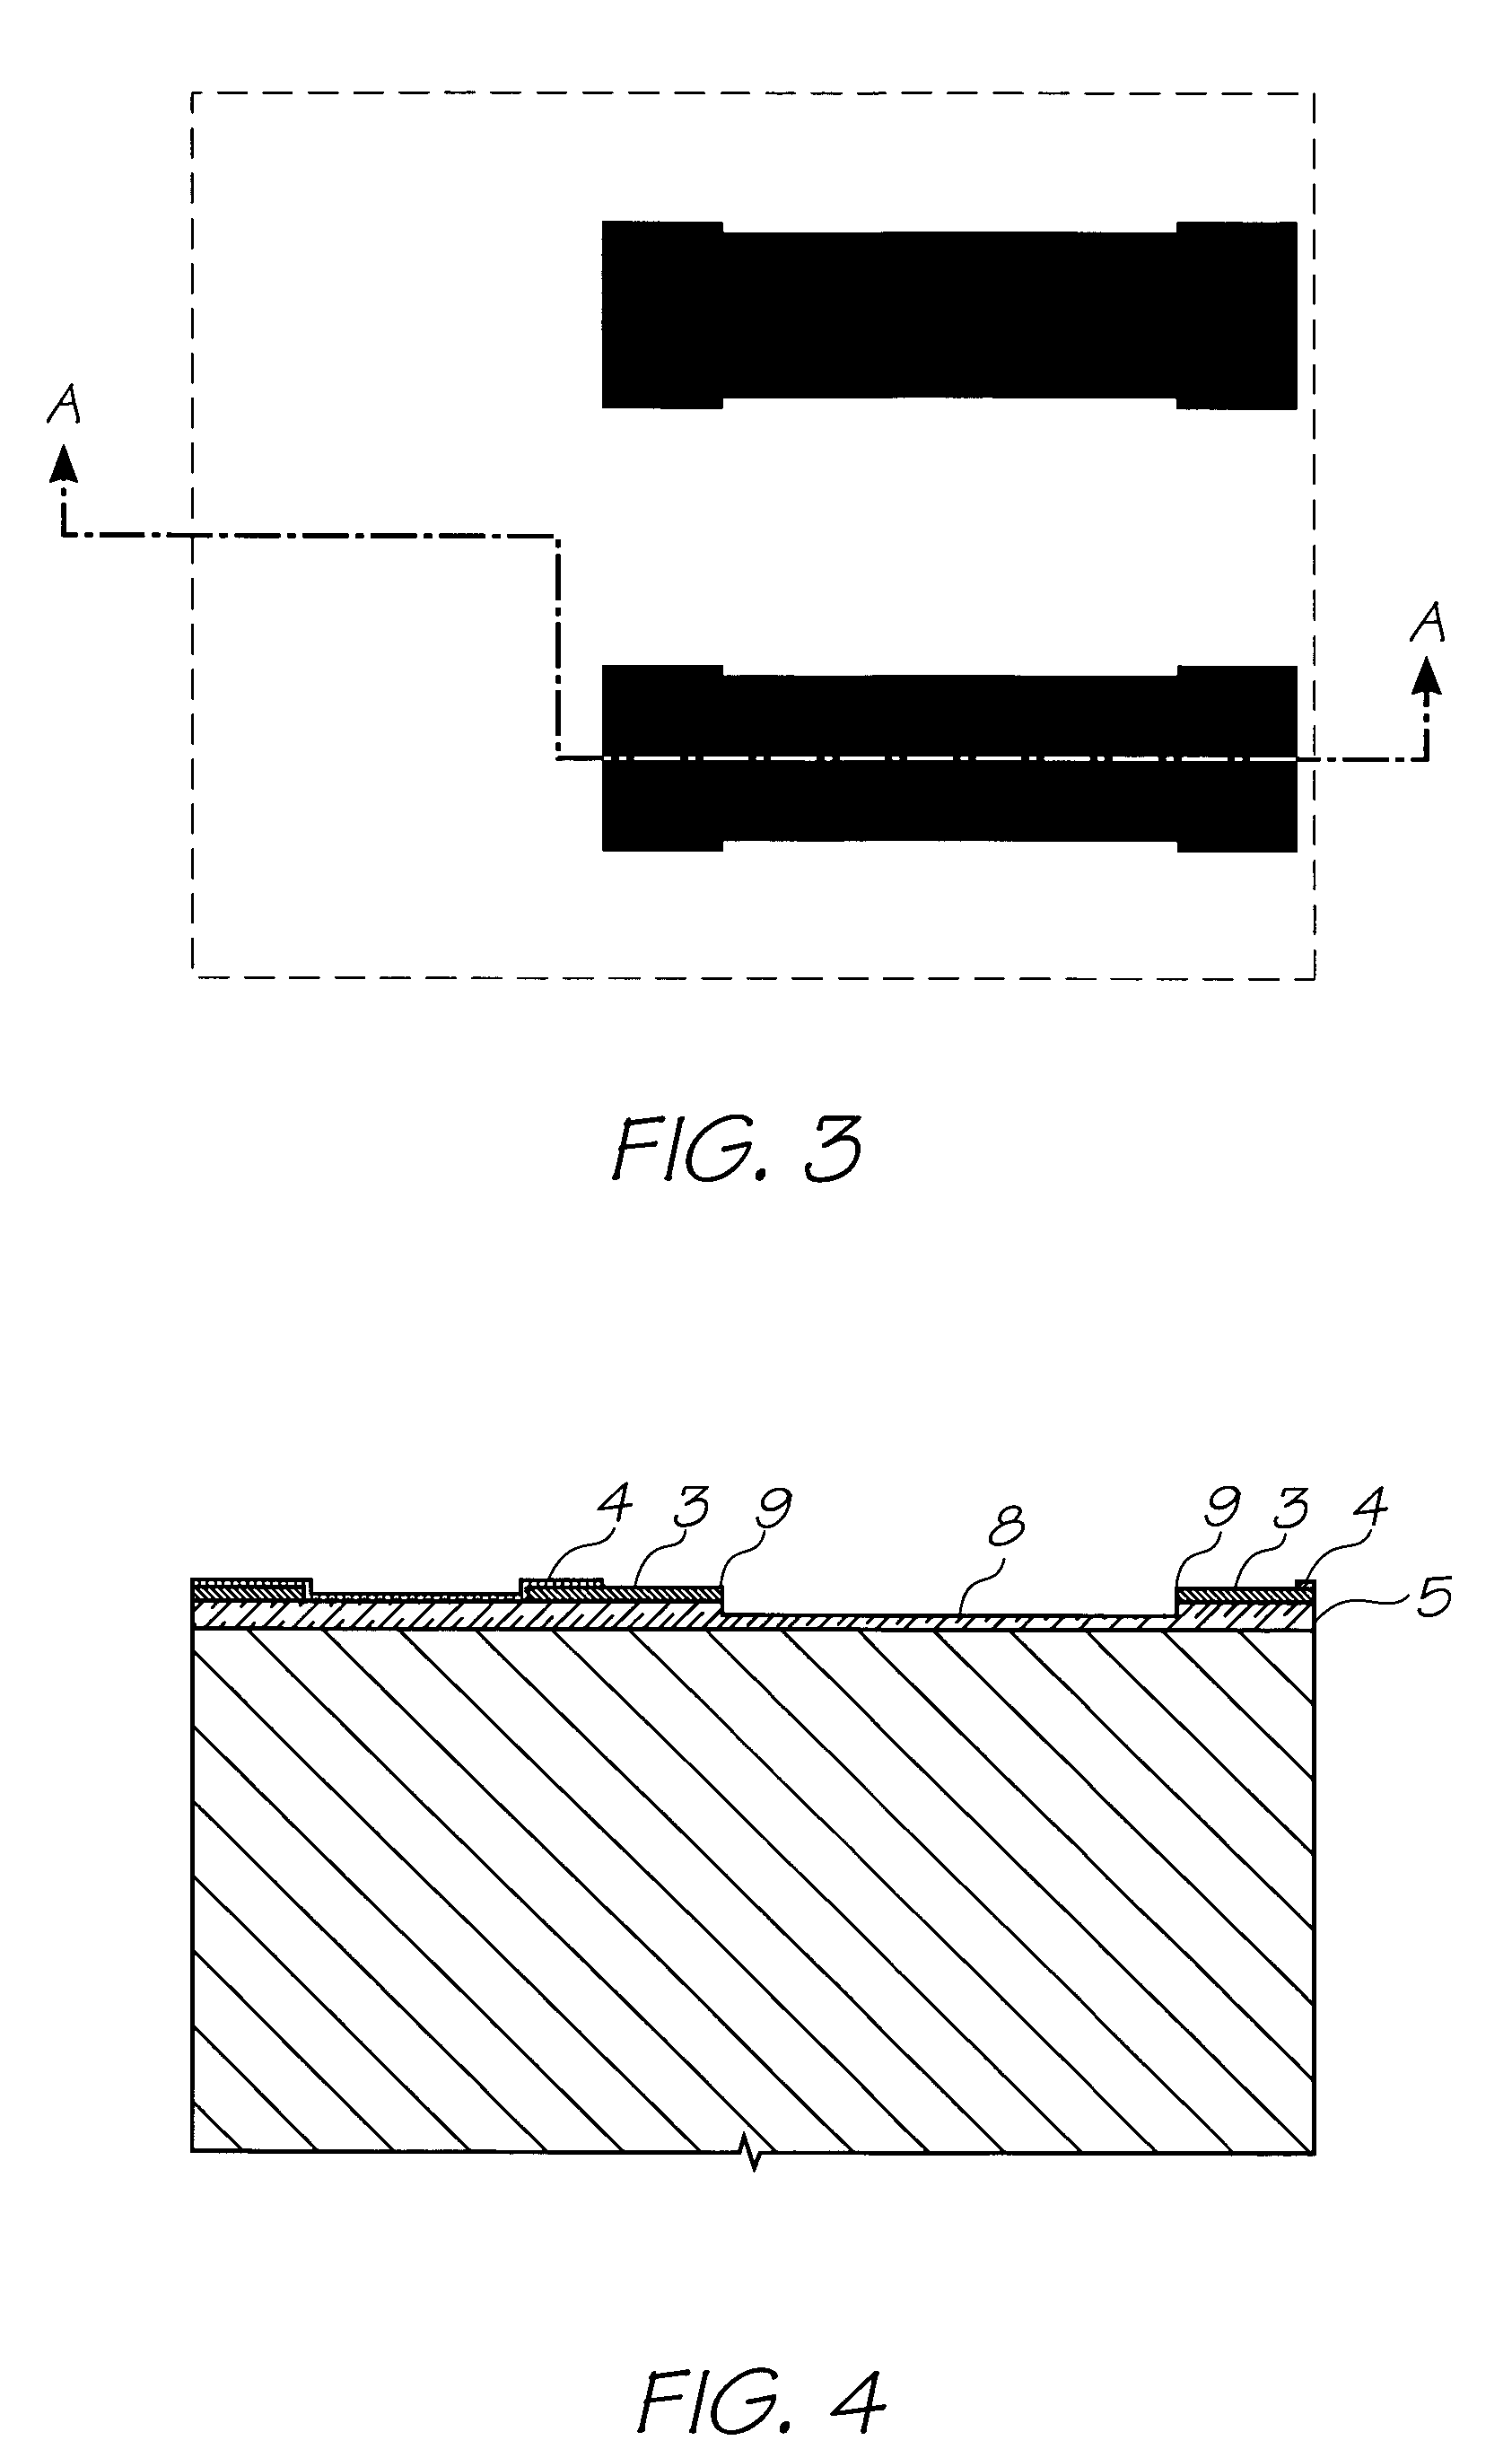 Method of fabricating suspended beam in a MEMS process